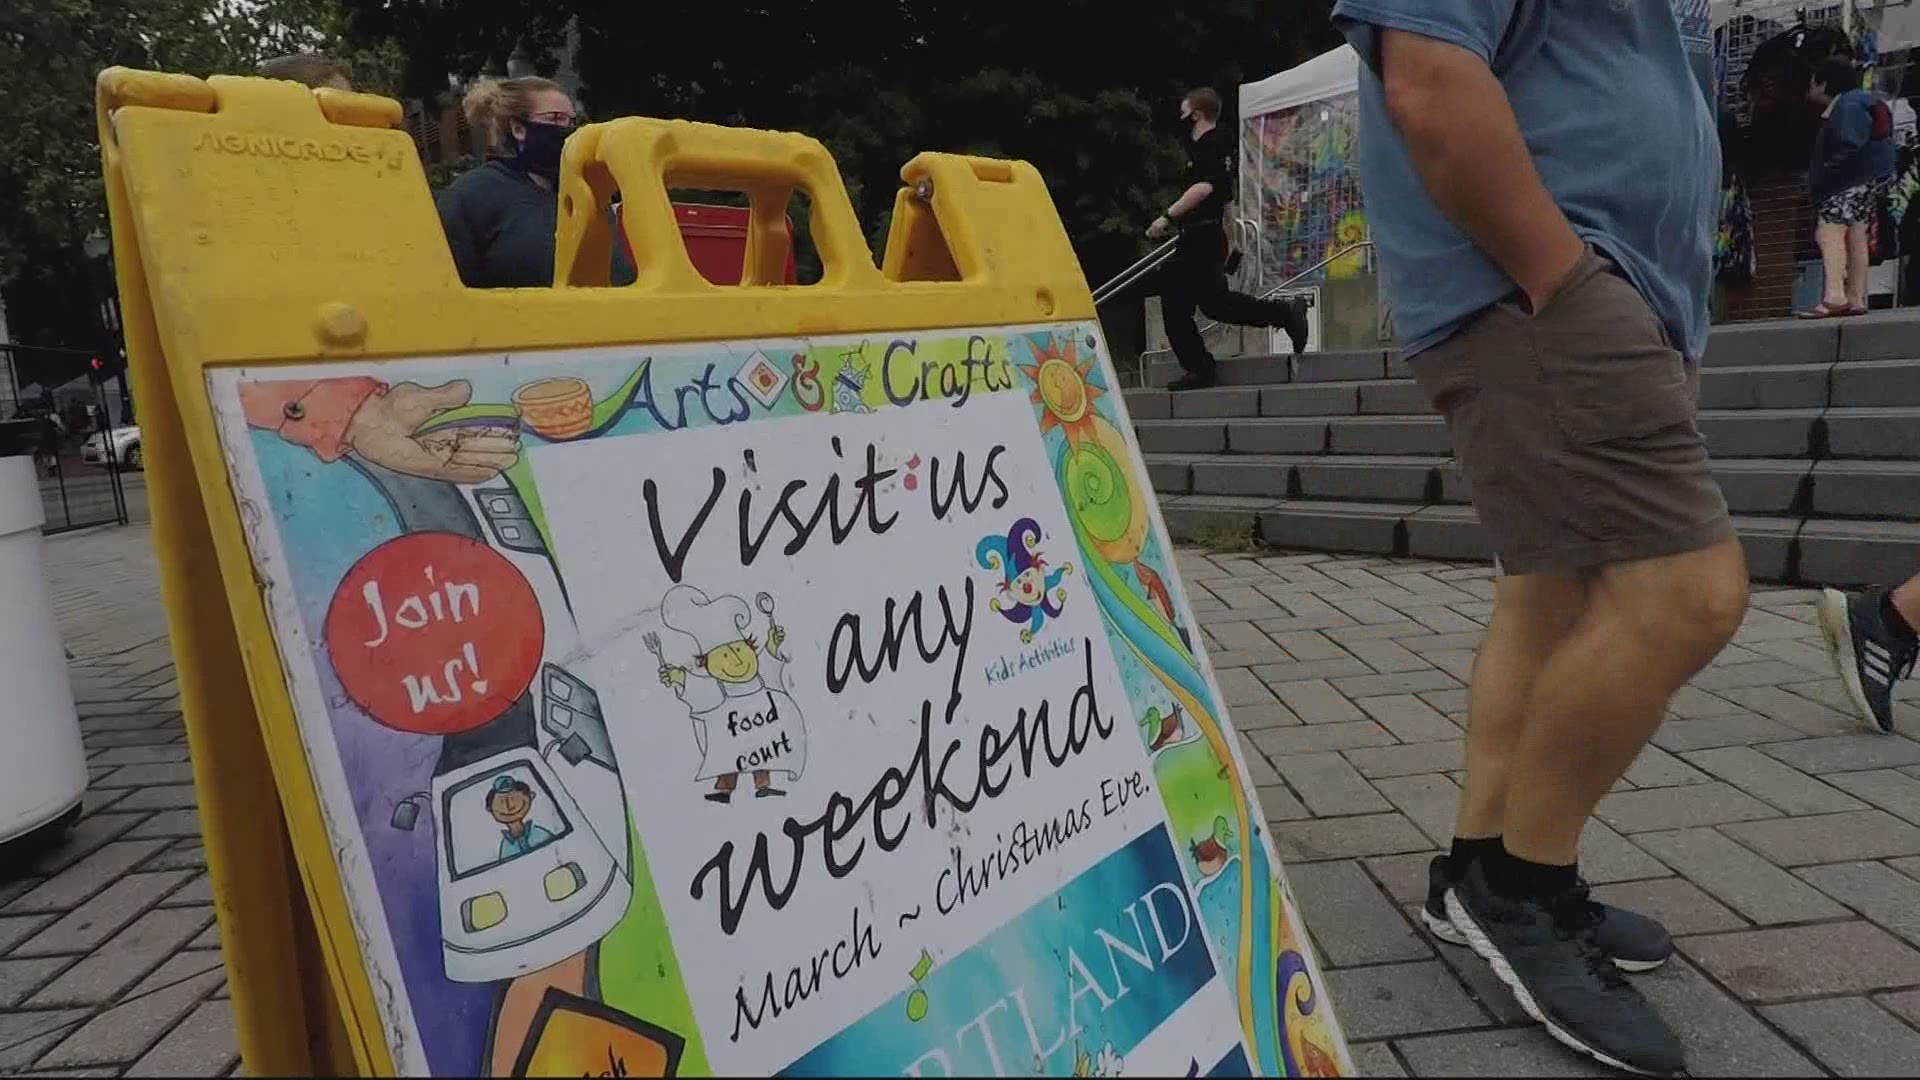 One of Portland's top tourist destinations is asking the community for financial help.